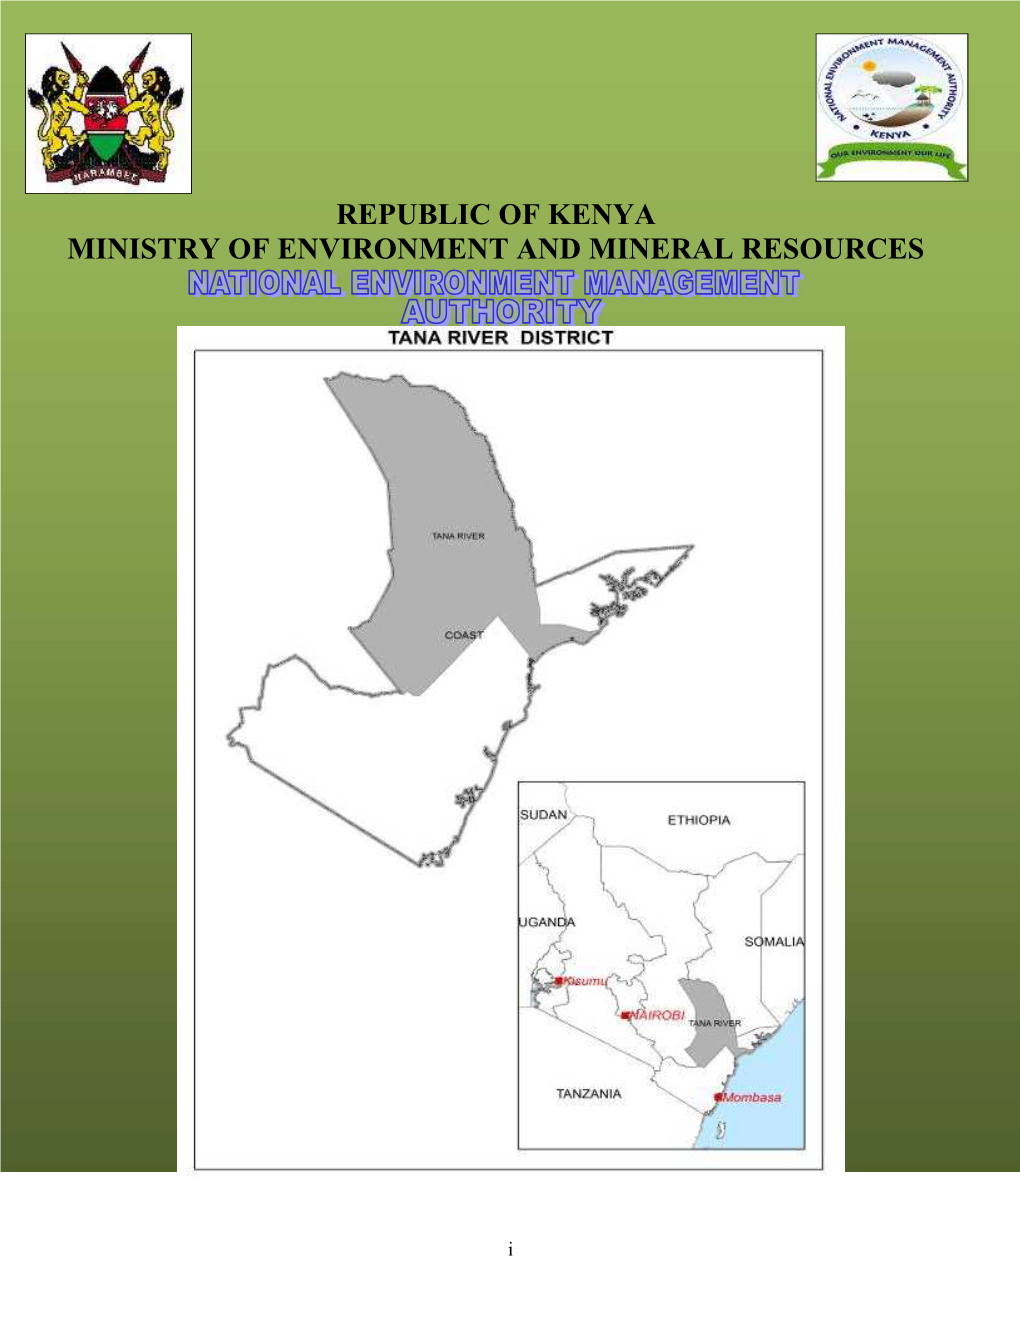 Republic of Kenya Ministry of Environment and Mineral Resources